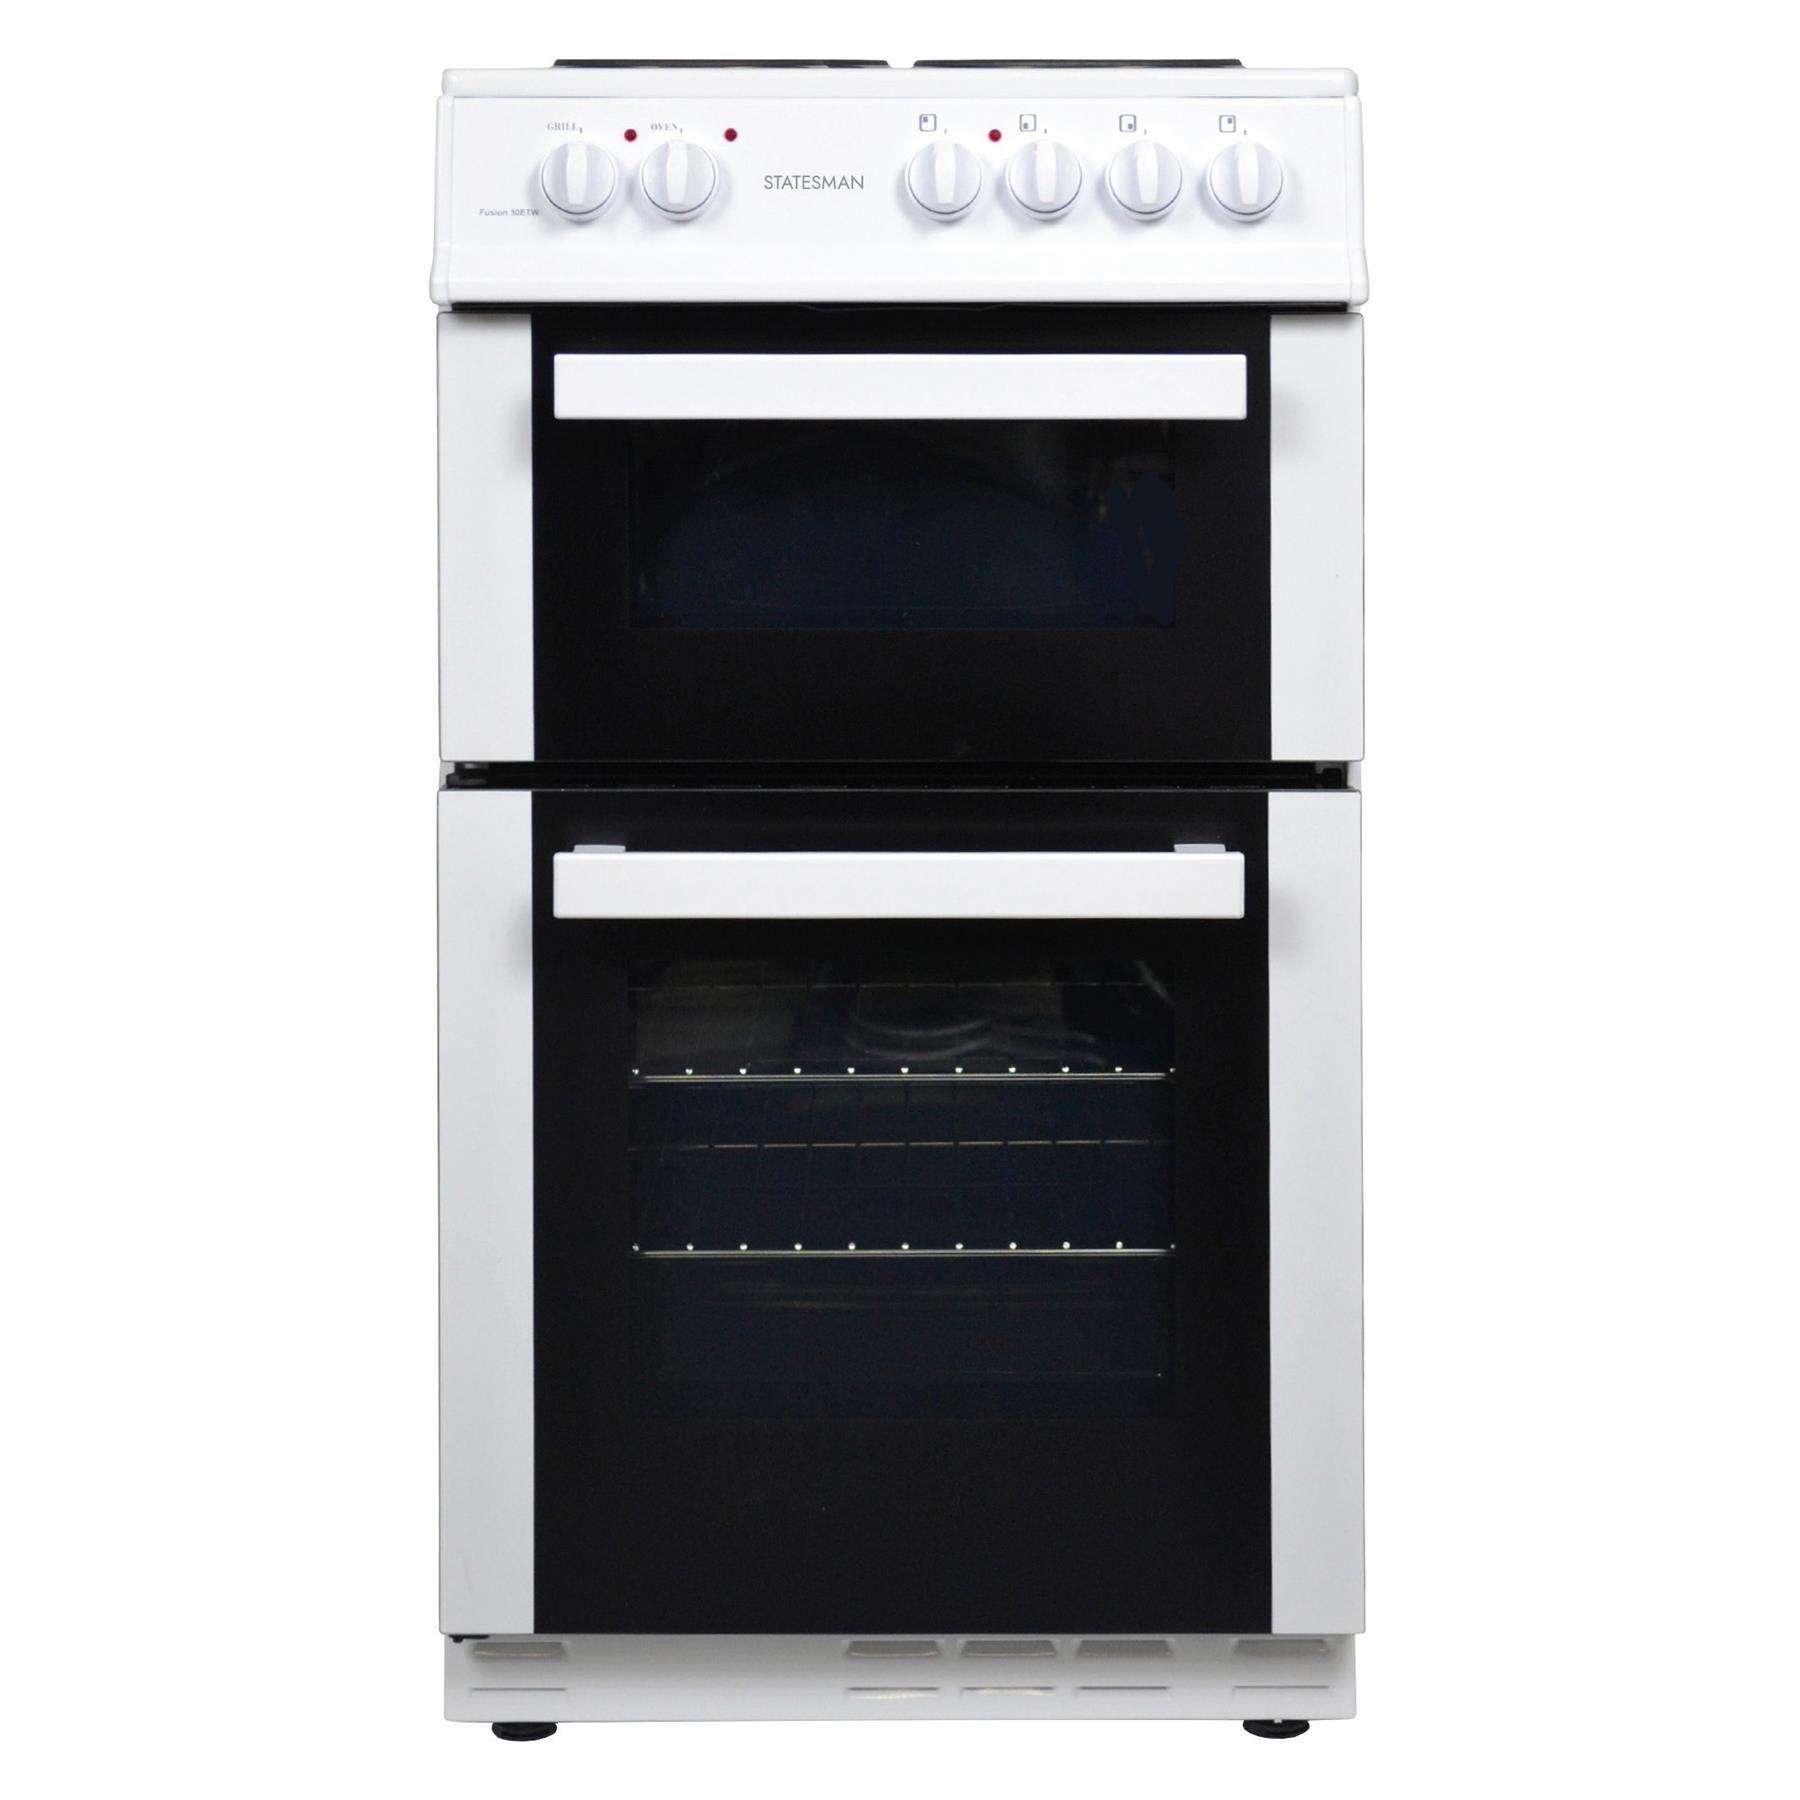 Double Oven Electric Cooker